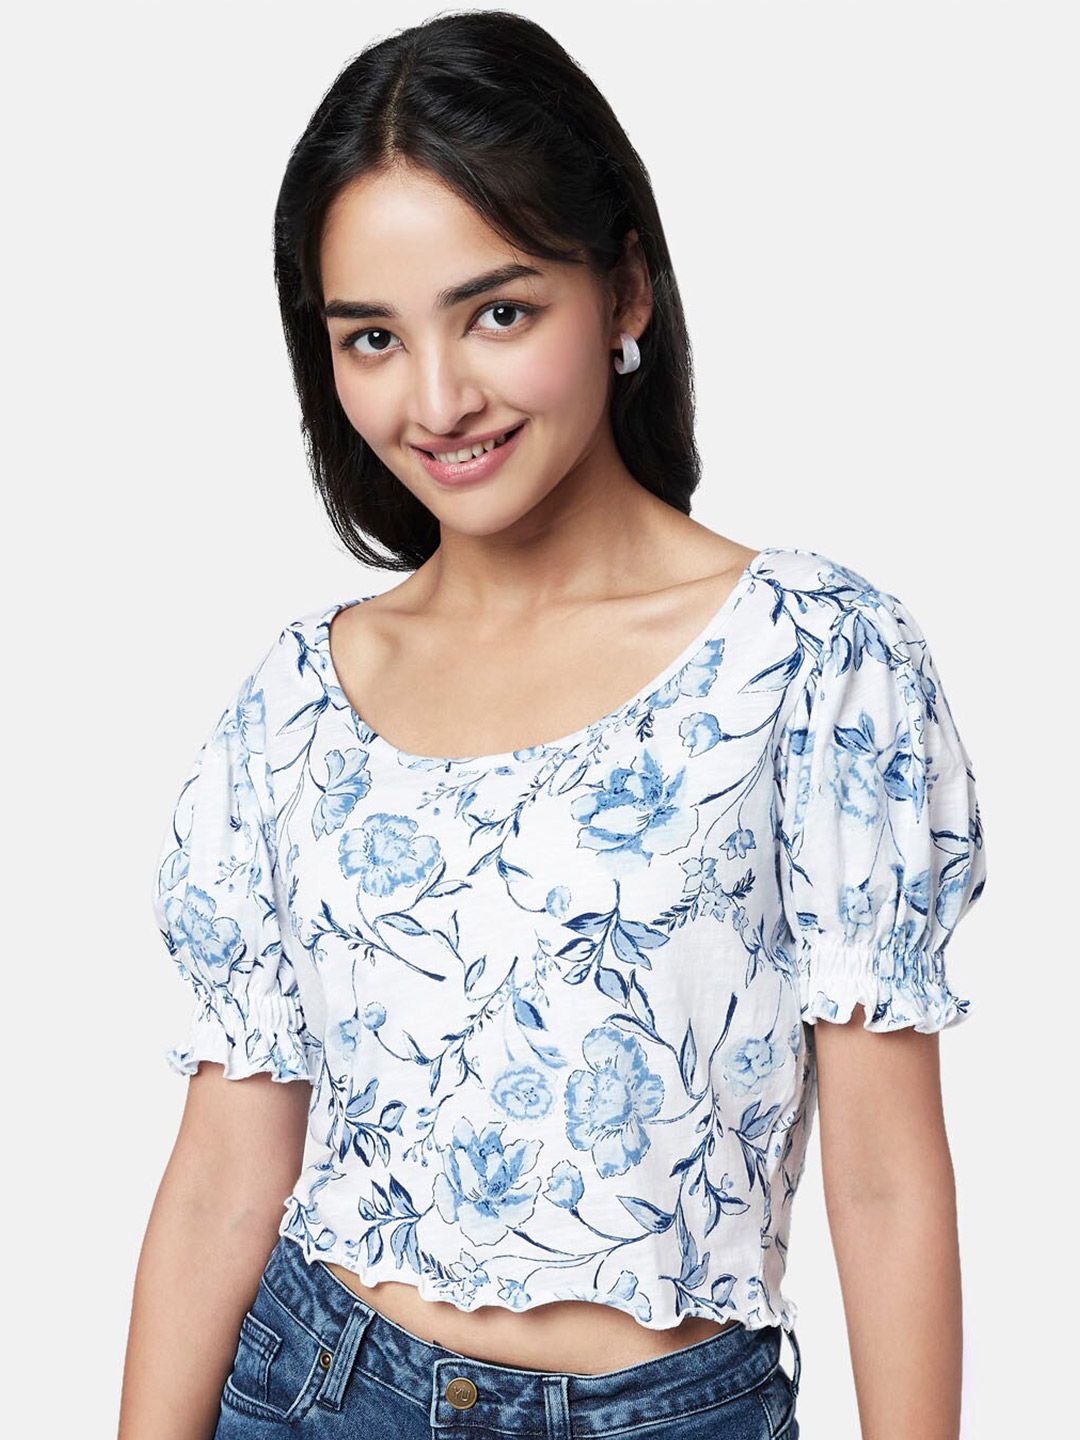 YU by Pantaloons Blue & White Cotton Floral Print Crop Top Price in India